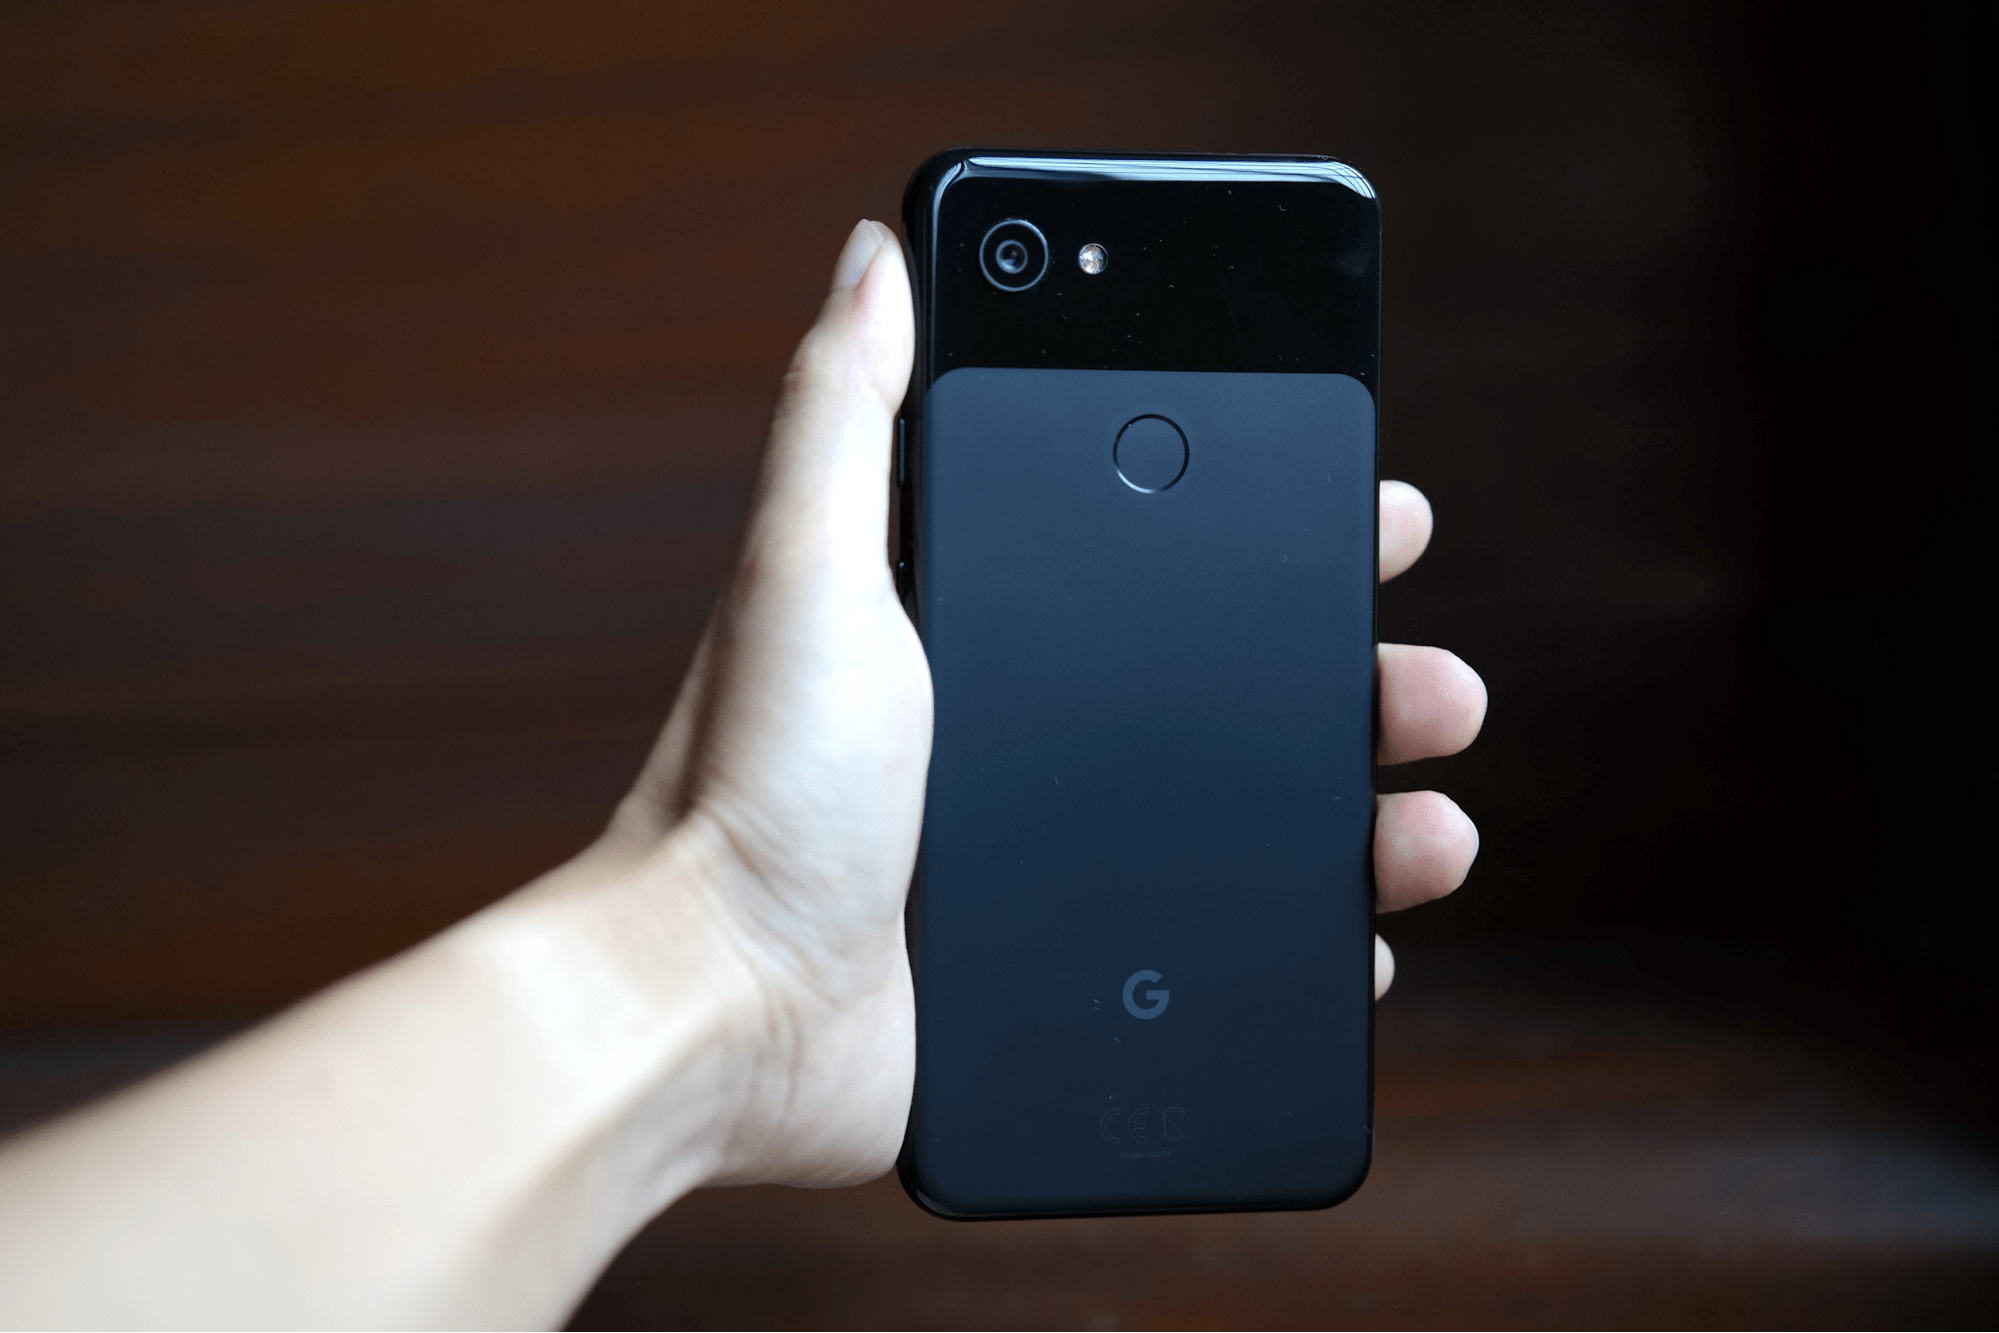 Google Pixel 3a and 3a XL Are Now 35% Off In Singapore